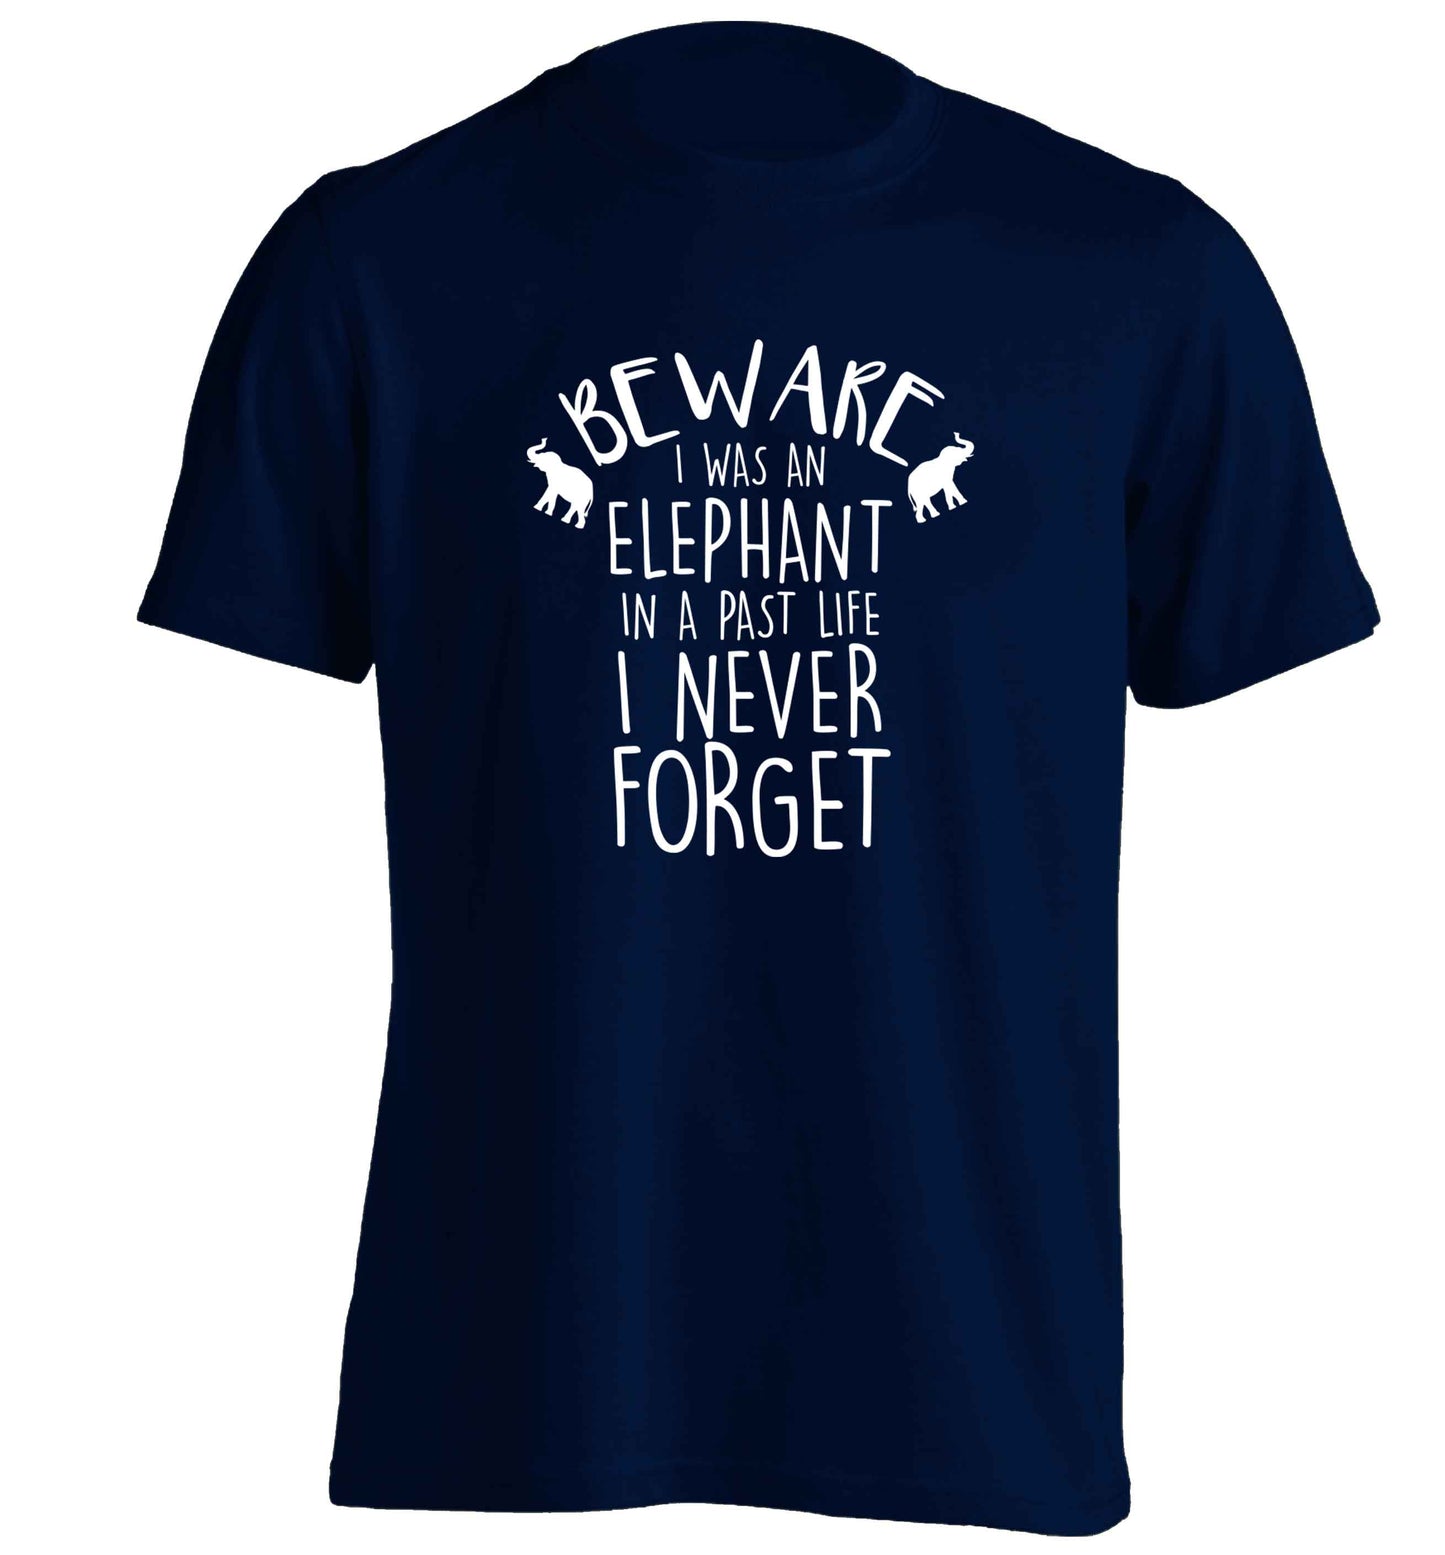 Beware I was an elephant in my past life I never forget adults unisex navy Tshirt 2XL